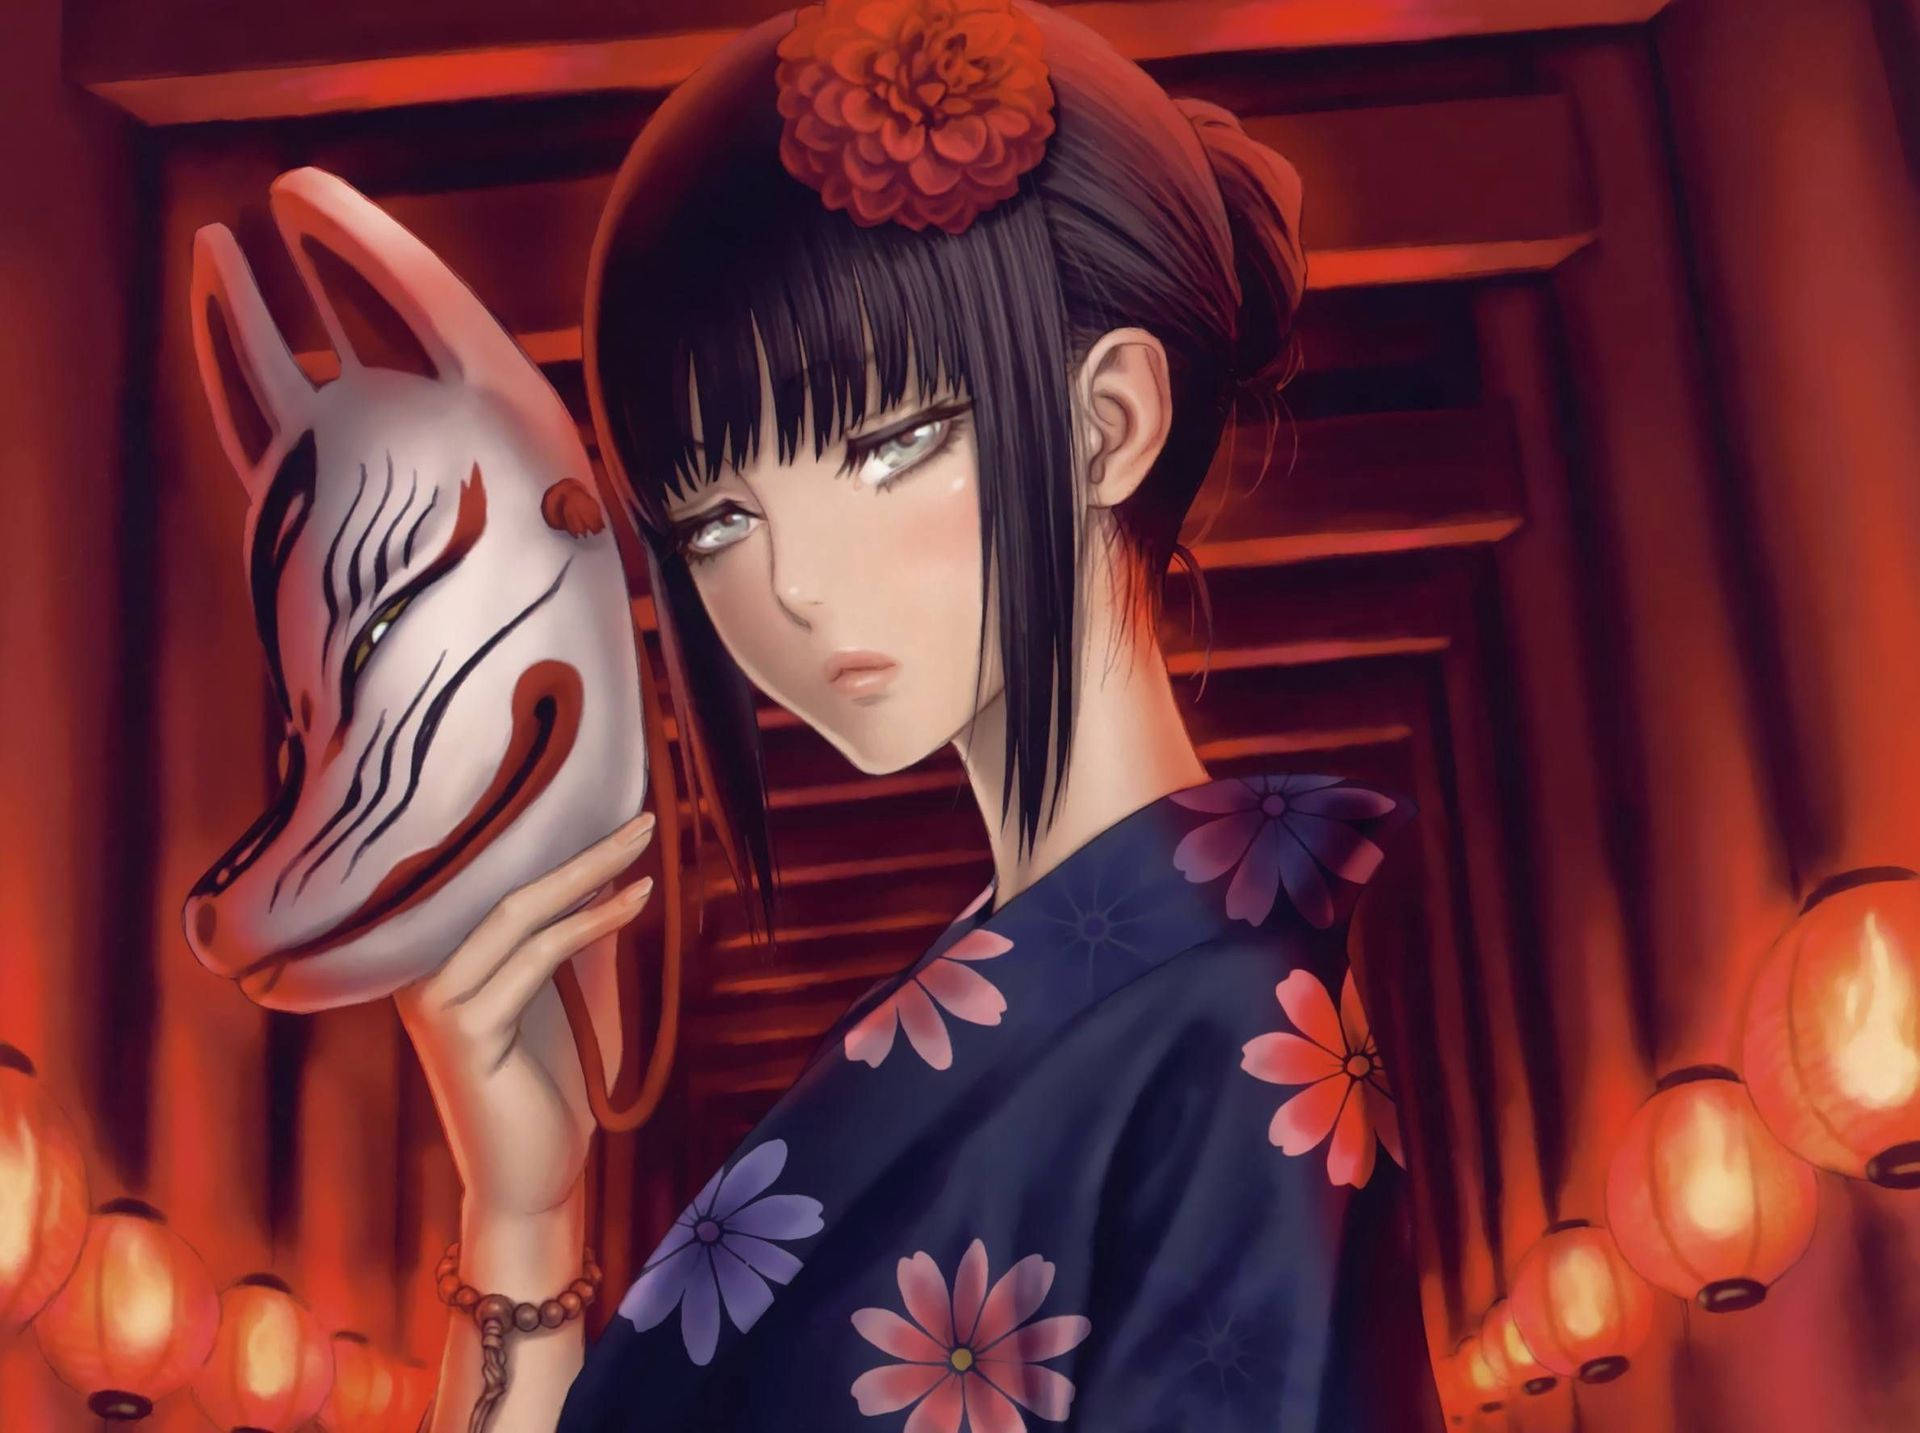 Get ready to explore the mystical world of Kitsune. Wallpaper